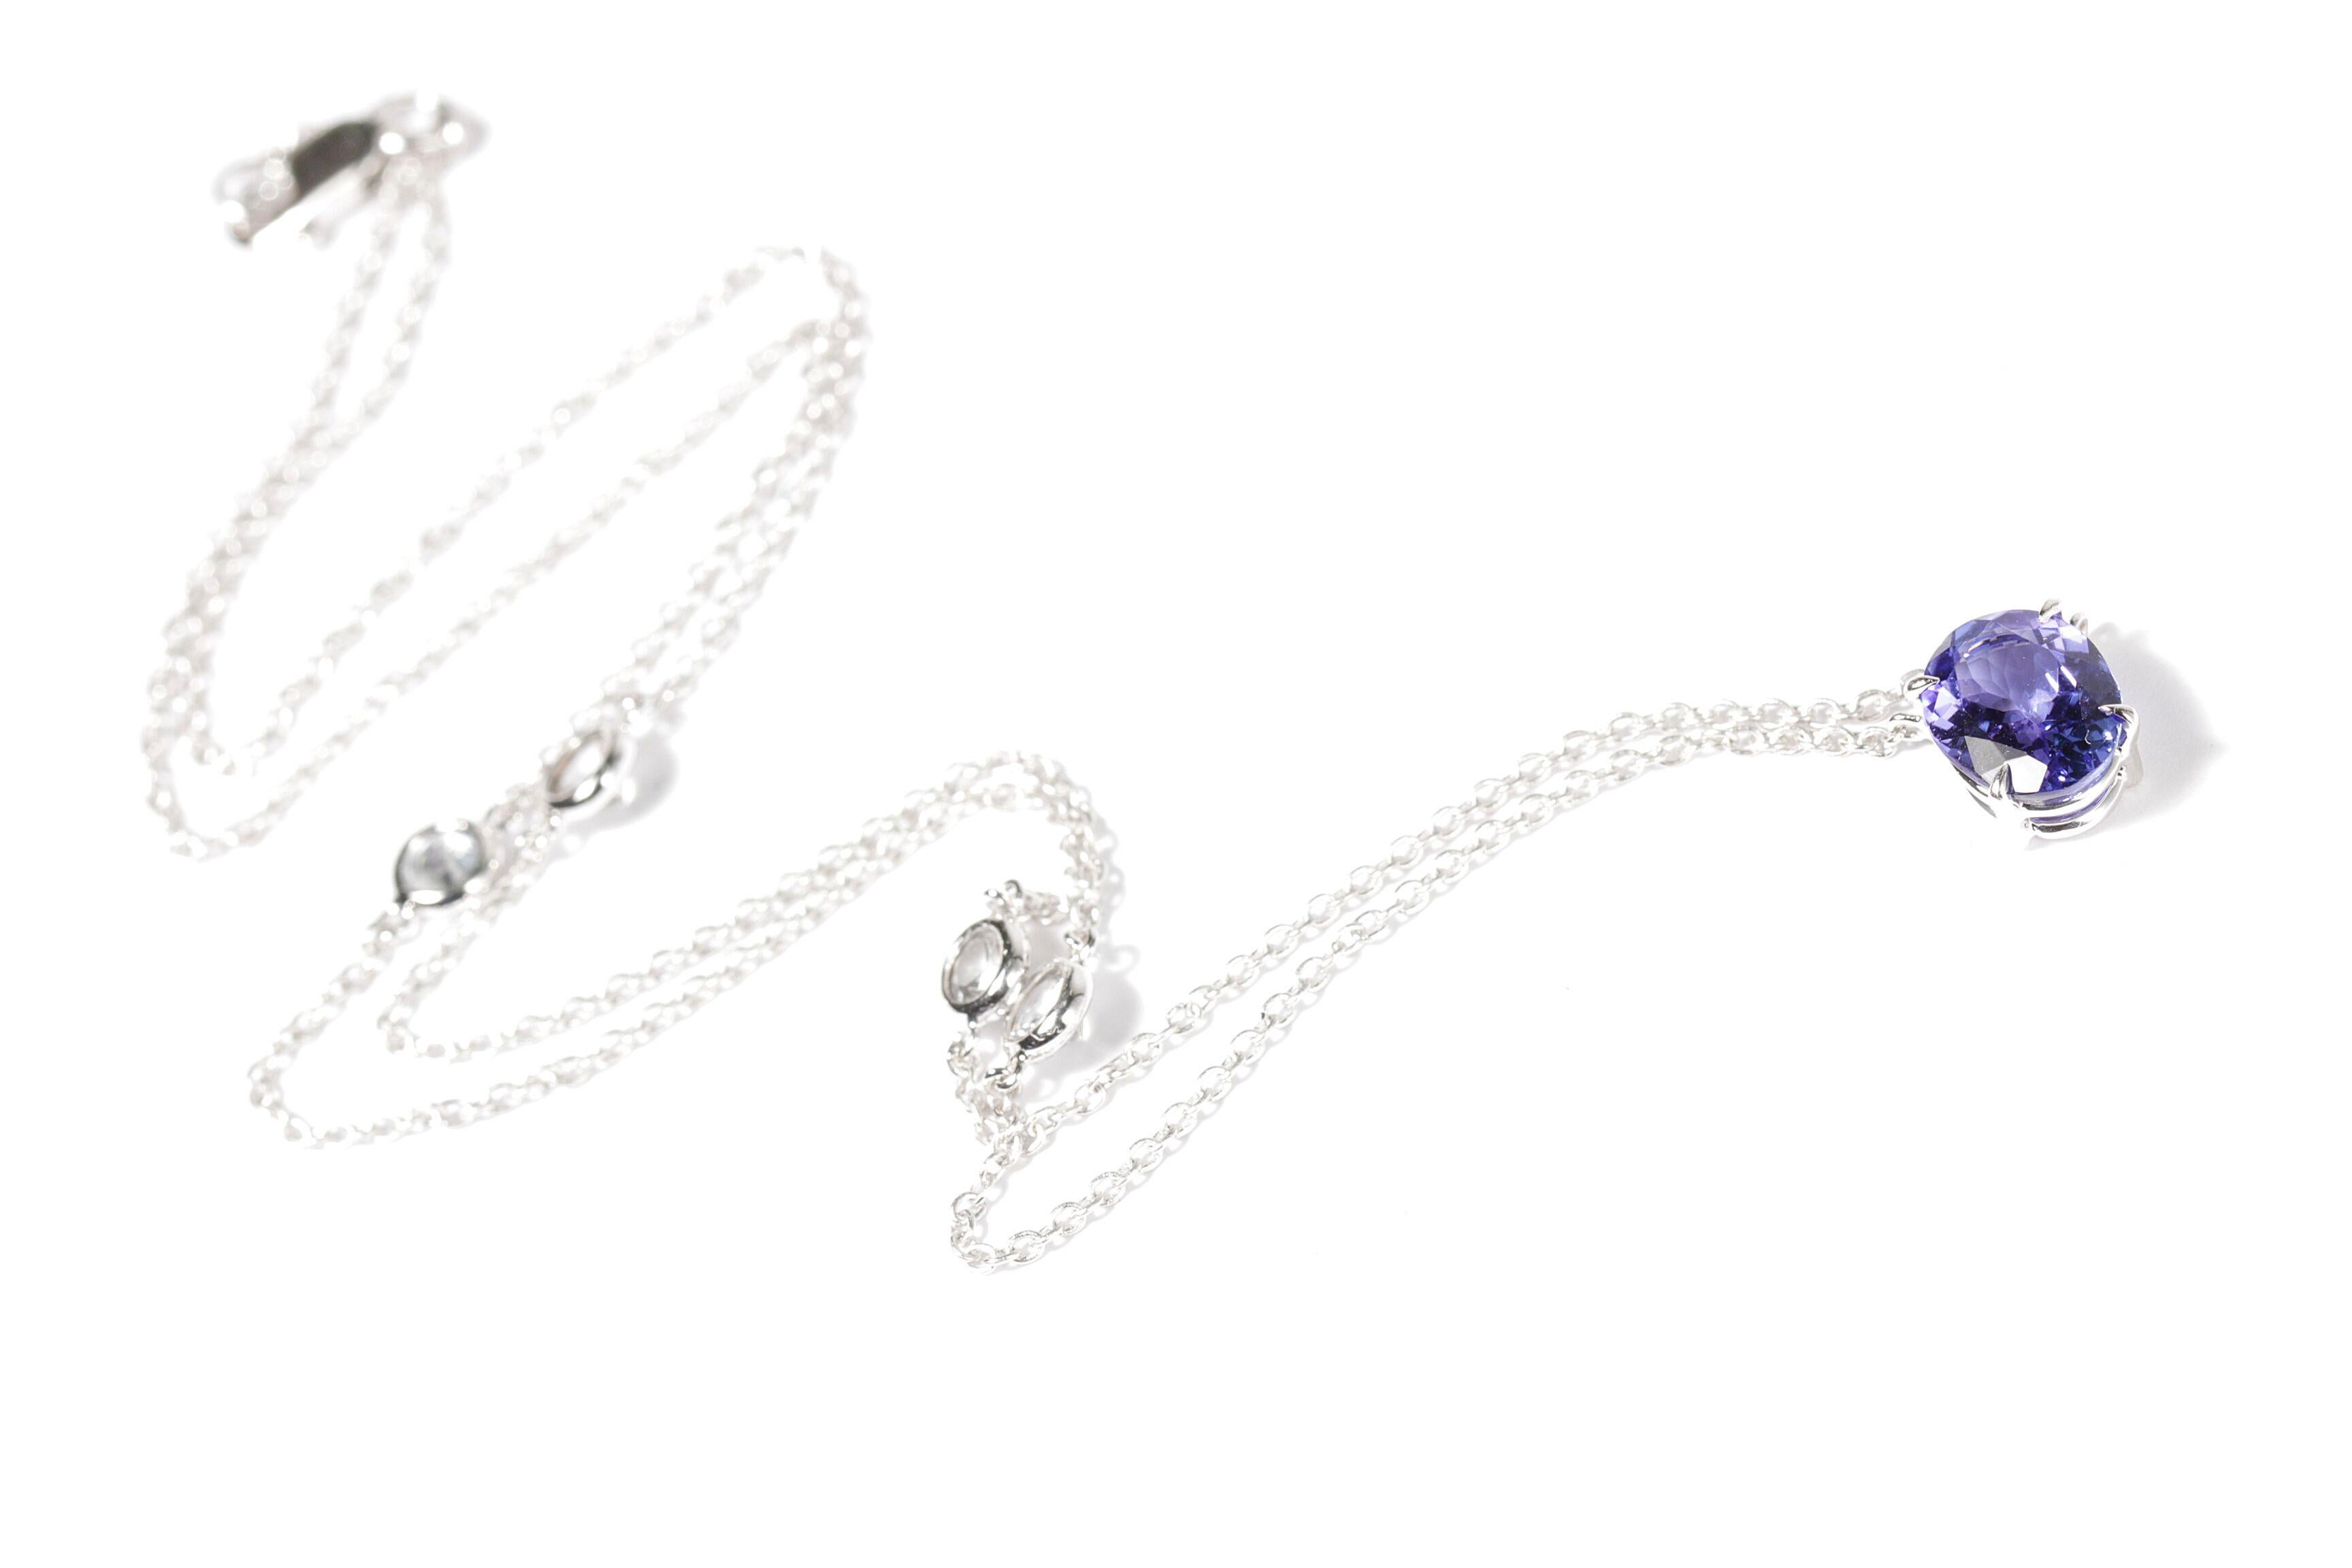 Designed exclusively by Ara Vartanian, this 18 Karat White Gold Necklace features an oval faceted 71.68 Carat Tanzanite with four round faceted colourless Sapphires totalling 0.84 Carats.